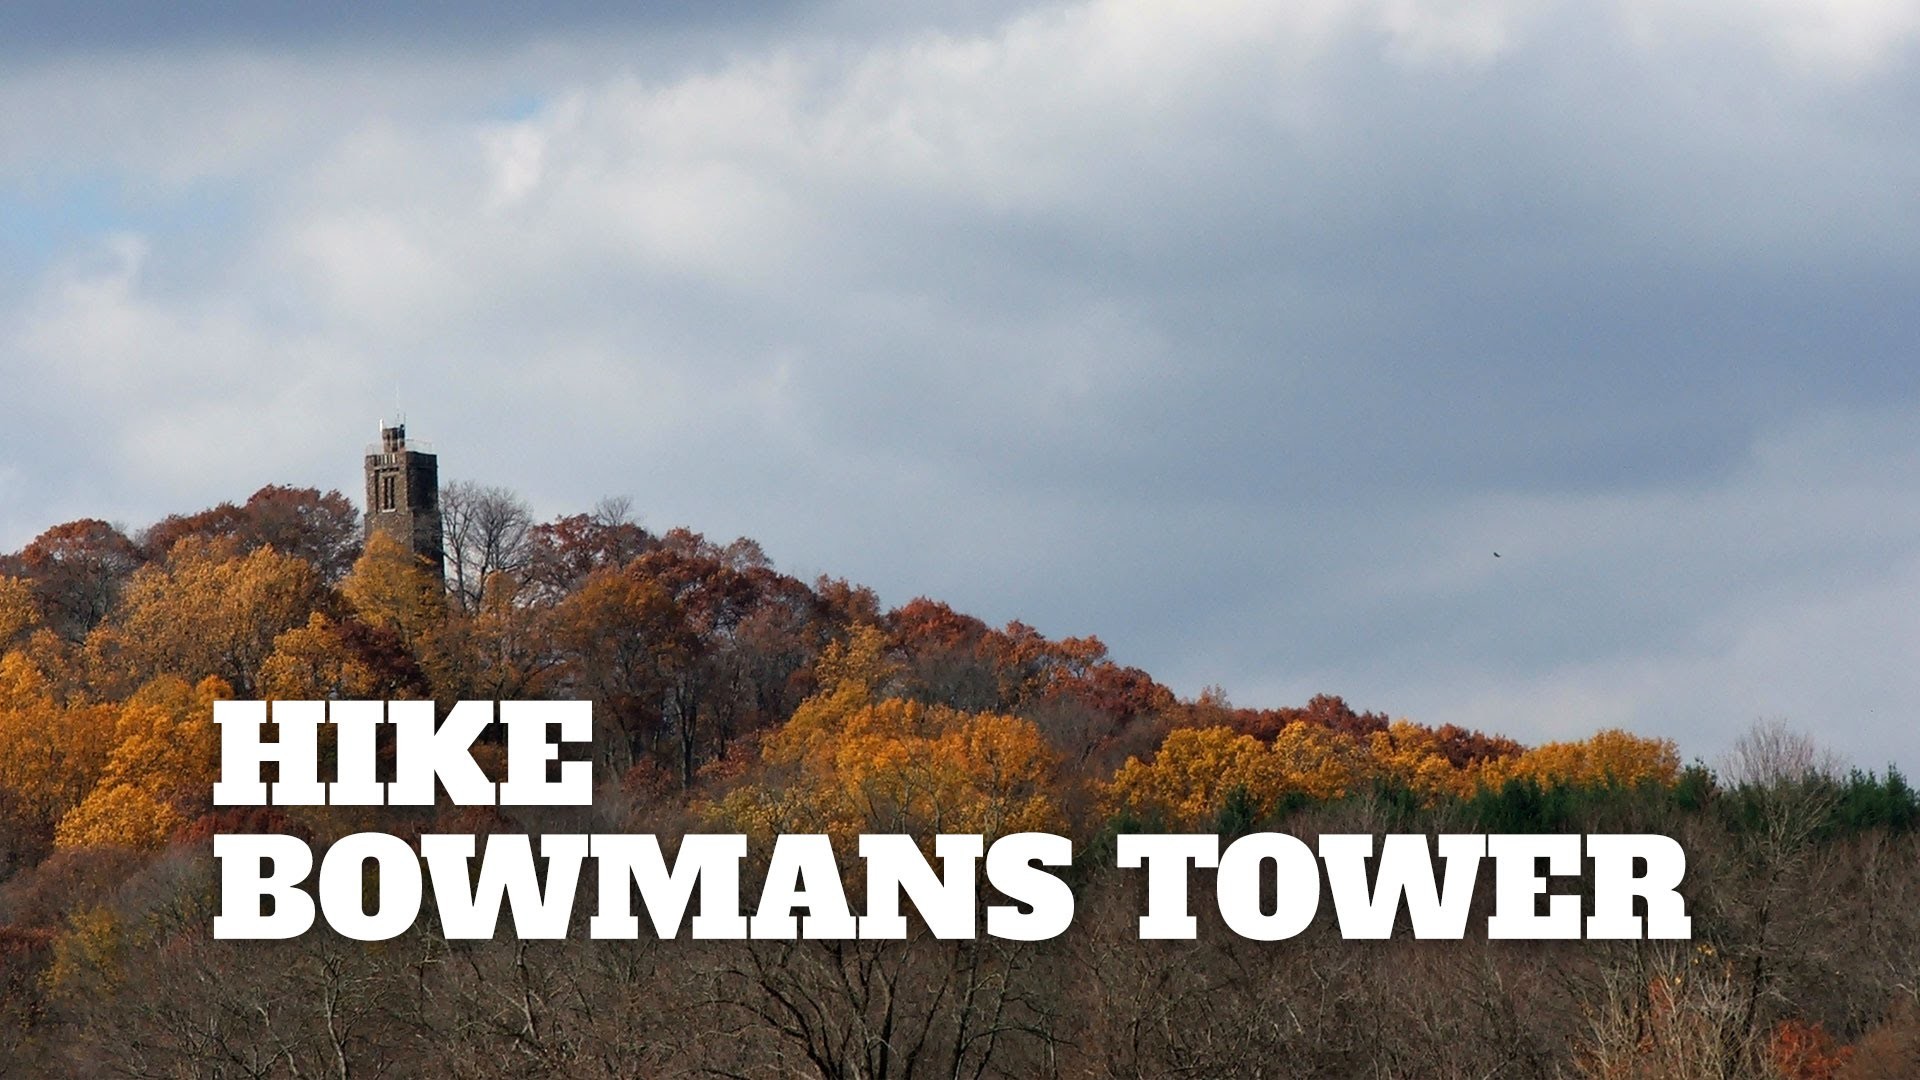 Washington Crossing State Park Hike to Bowmans Tower